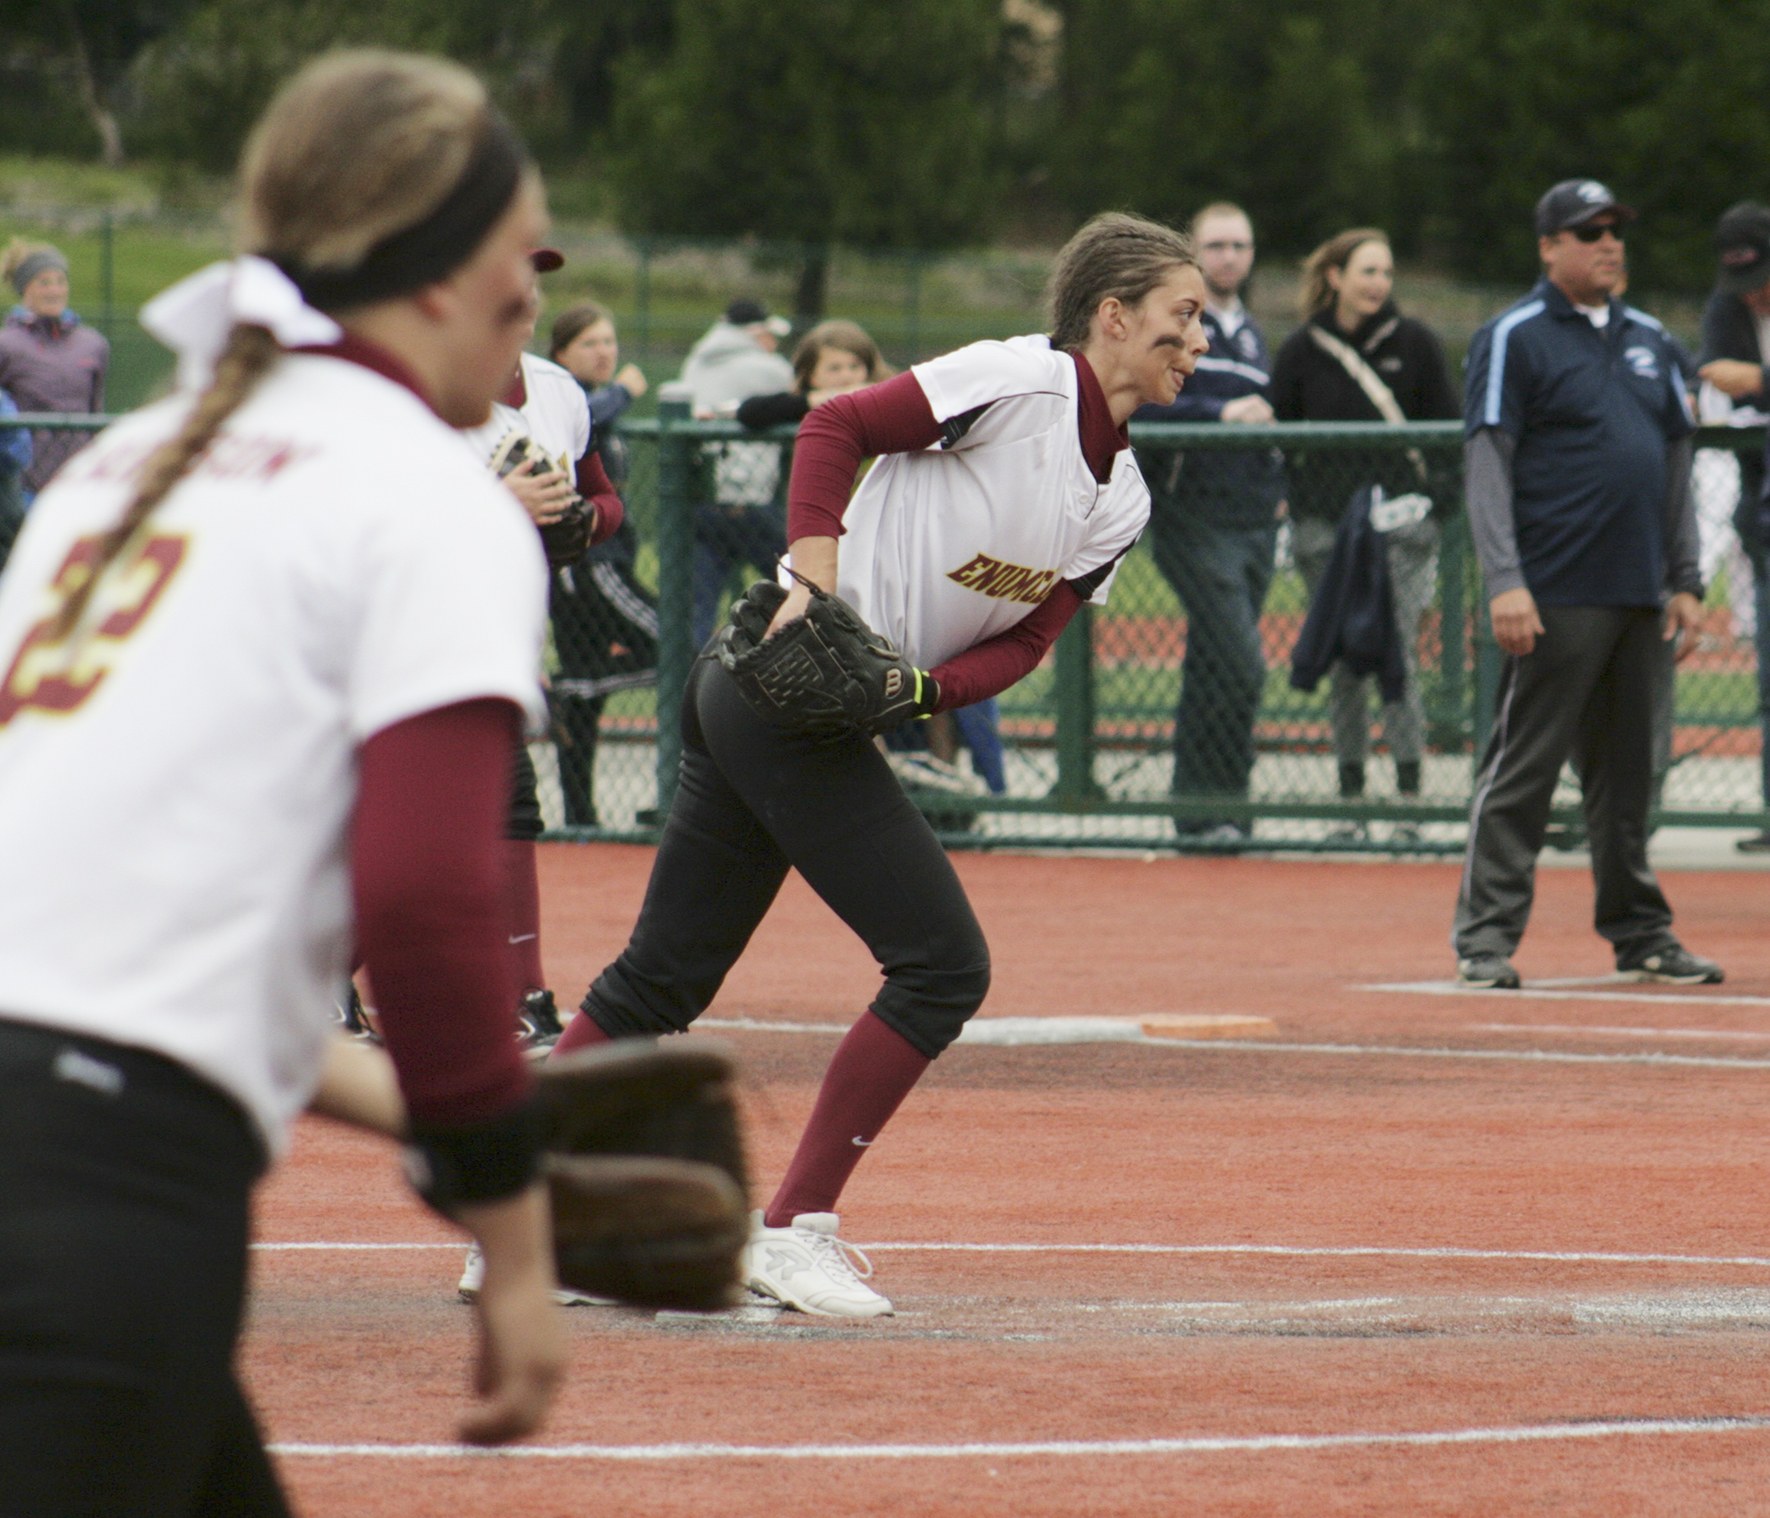 Enumclaw High School fastpitch athlete Quinn Breidenbach gearing up a pitch during the state championship against Meadowdale this year.